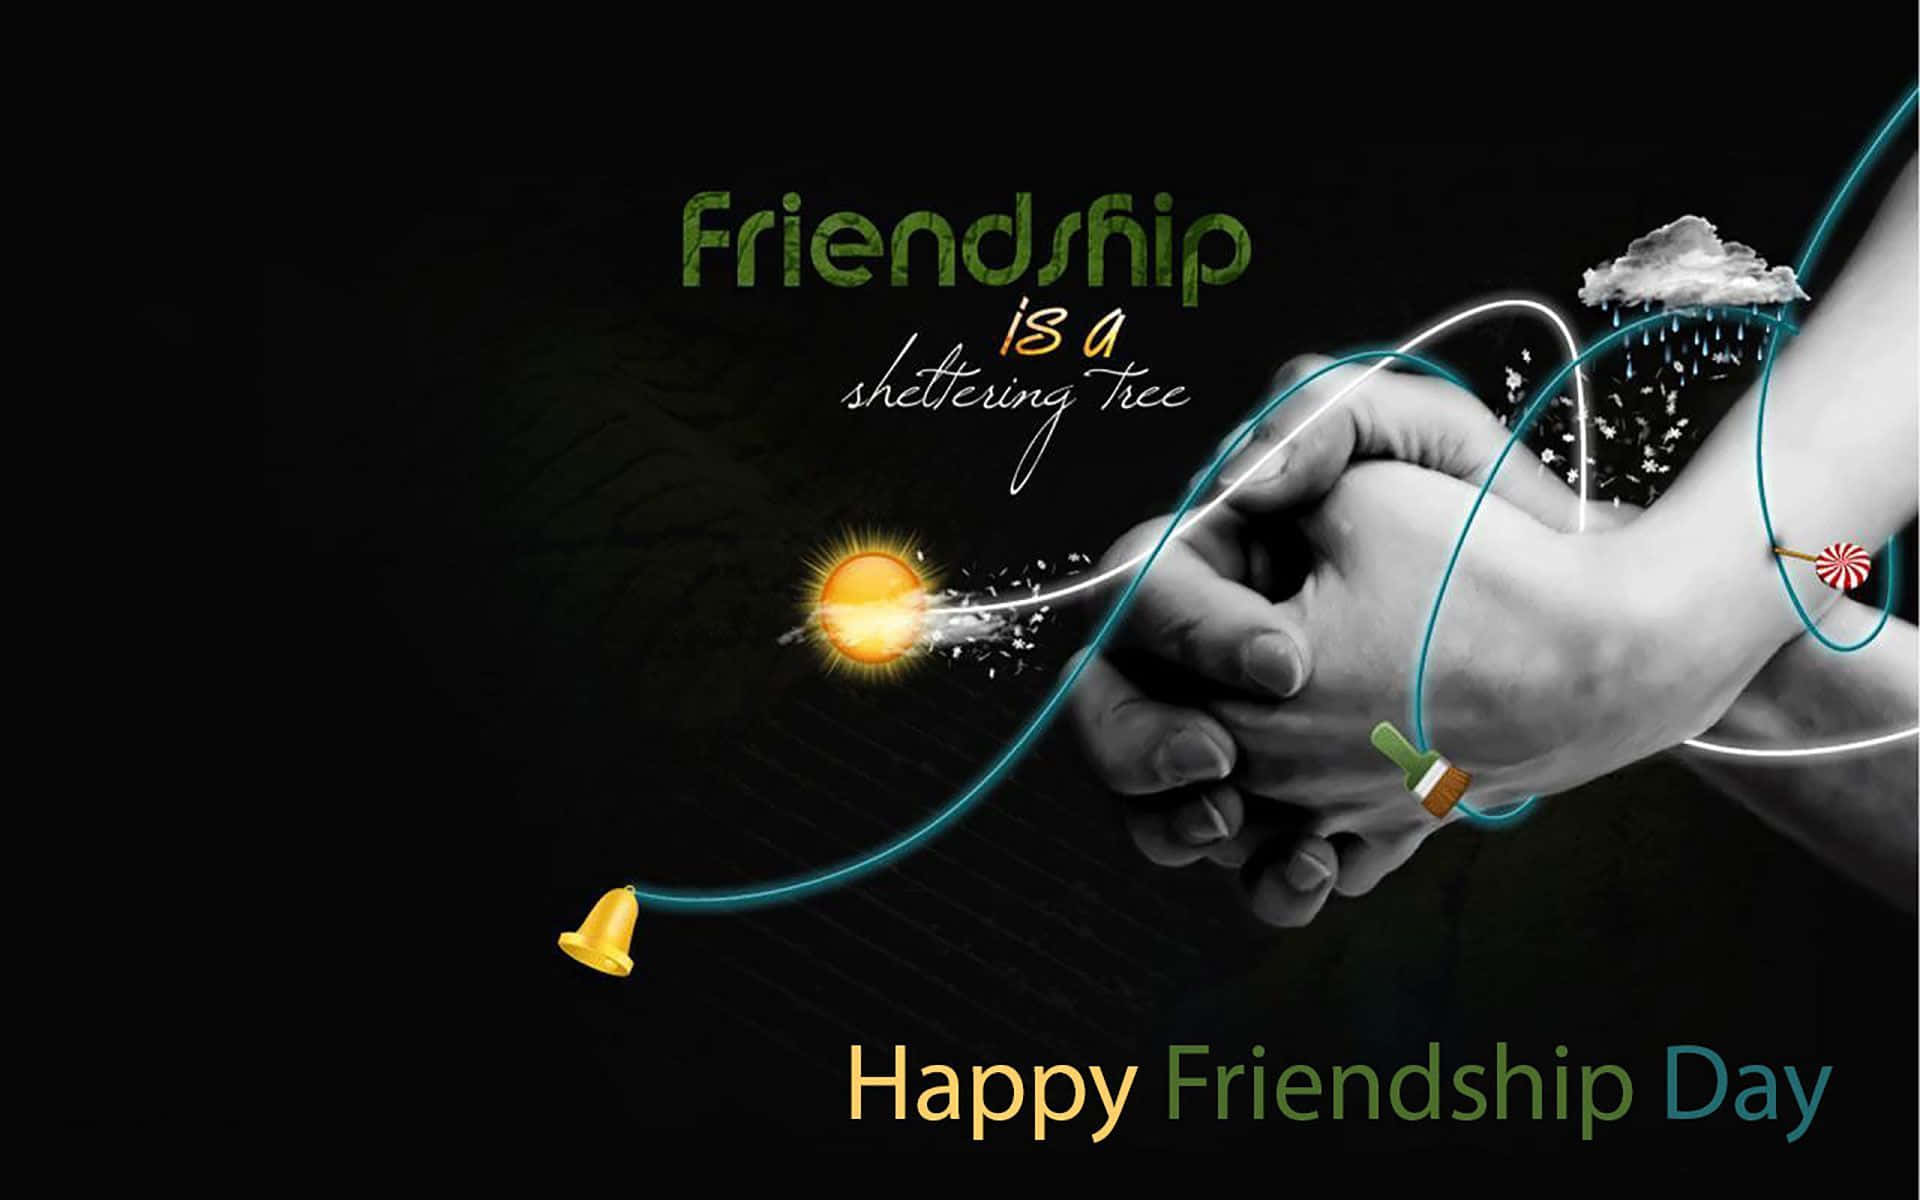 Cherishing Moments Together on Friendship Day